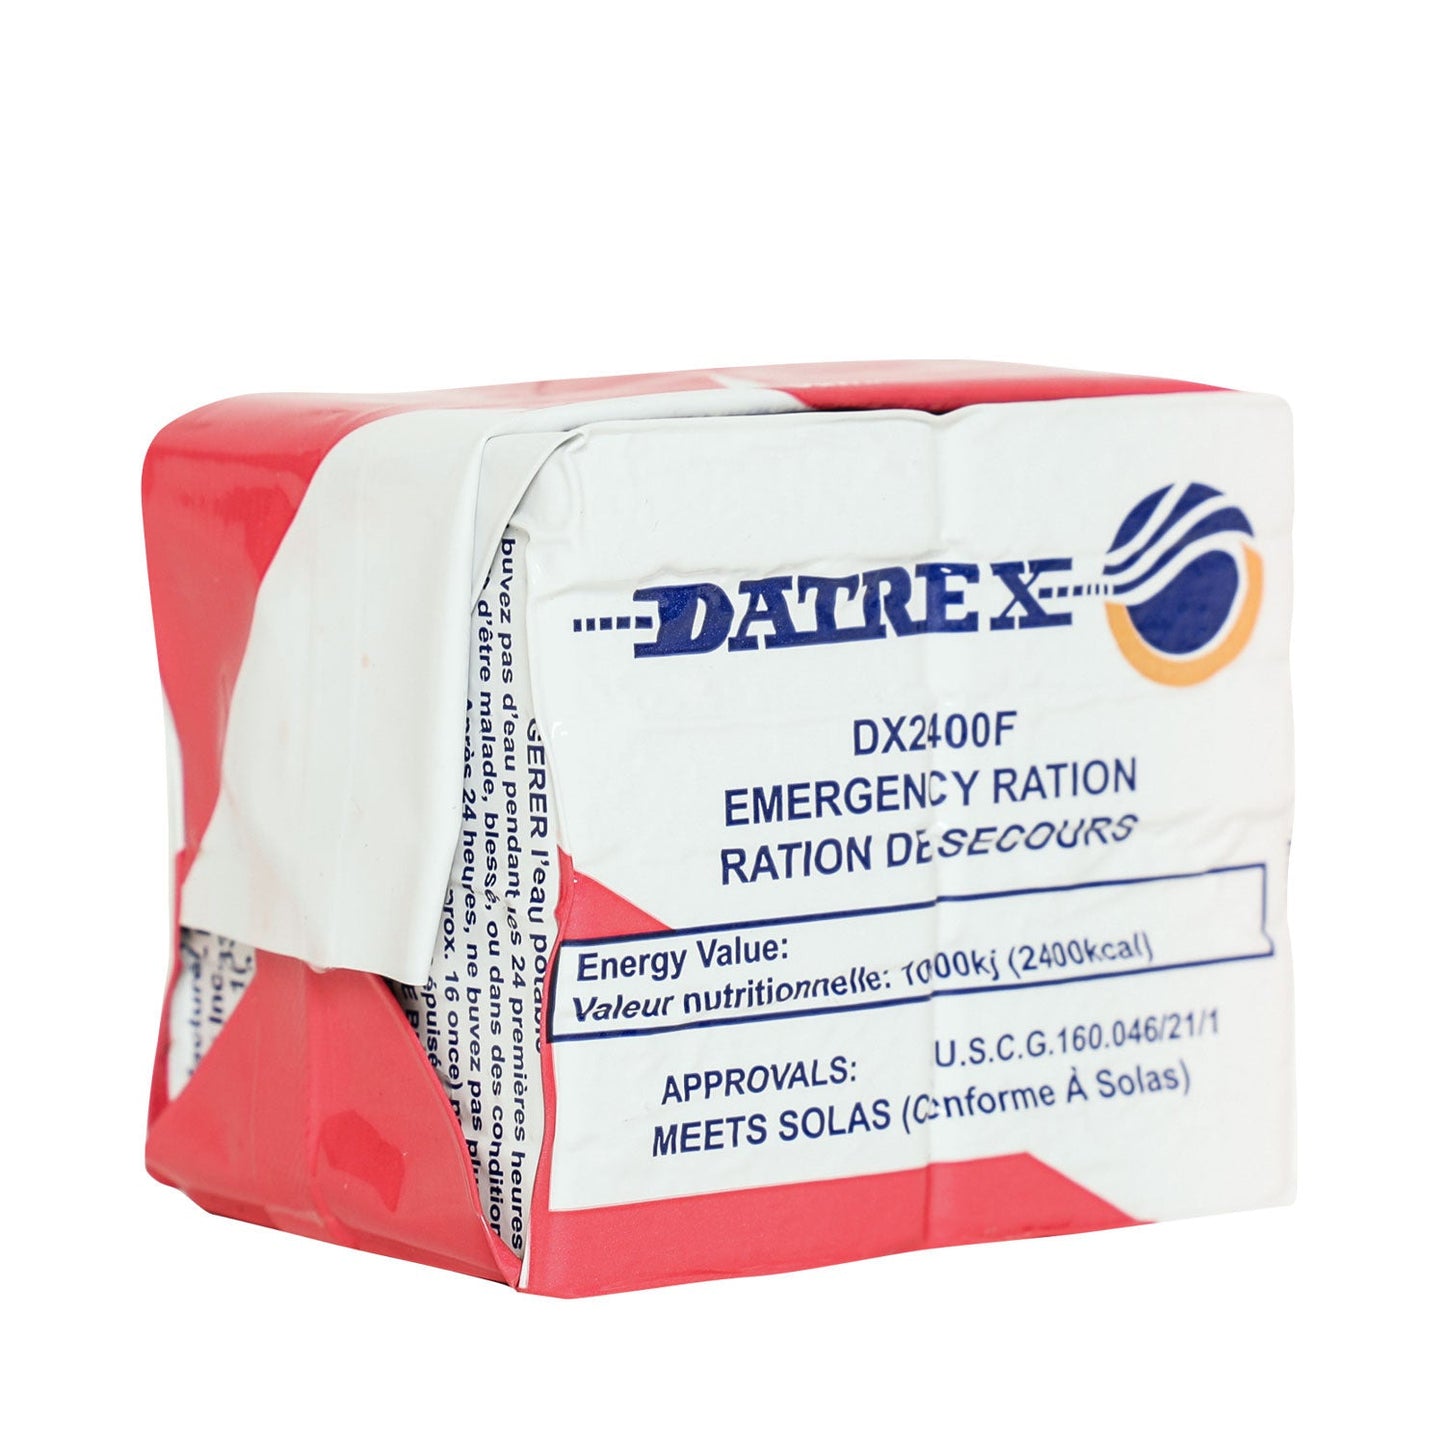   The Datrex Blue 2400 Calorie Emergency Food Ration contains 12 ready to eat, high energy Superior coconut flavored bars.       Ready To Eat, High Energy Coconut Flavored Emergency Food Bars     Each Emergency Ration Bar Contains 200 Calories     Made Of All Natural Ingredients Including Wheat Flour, Cane Sugar, Water And Coconut     12 Bars Per Pack